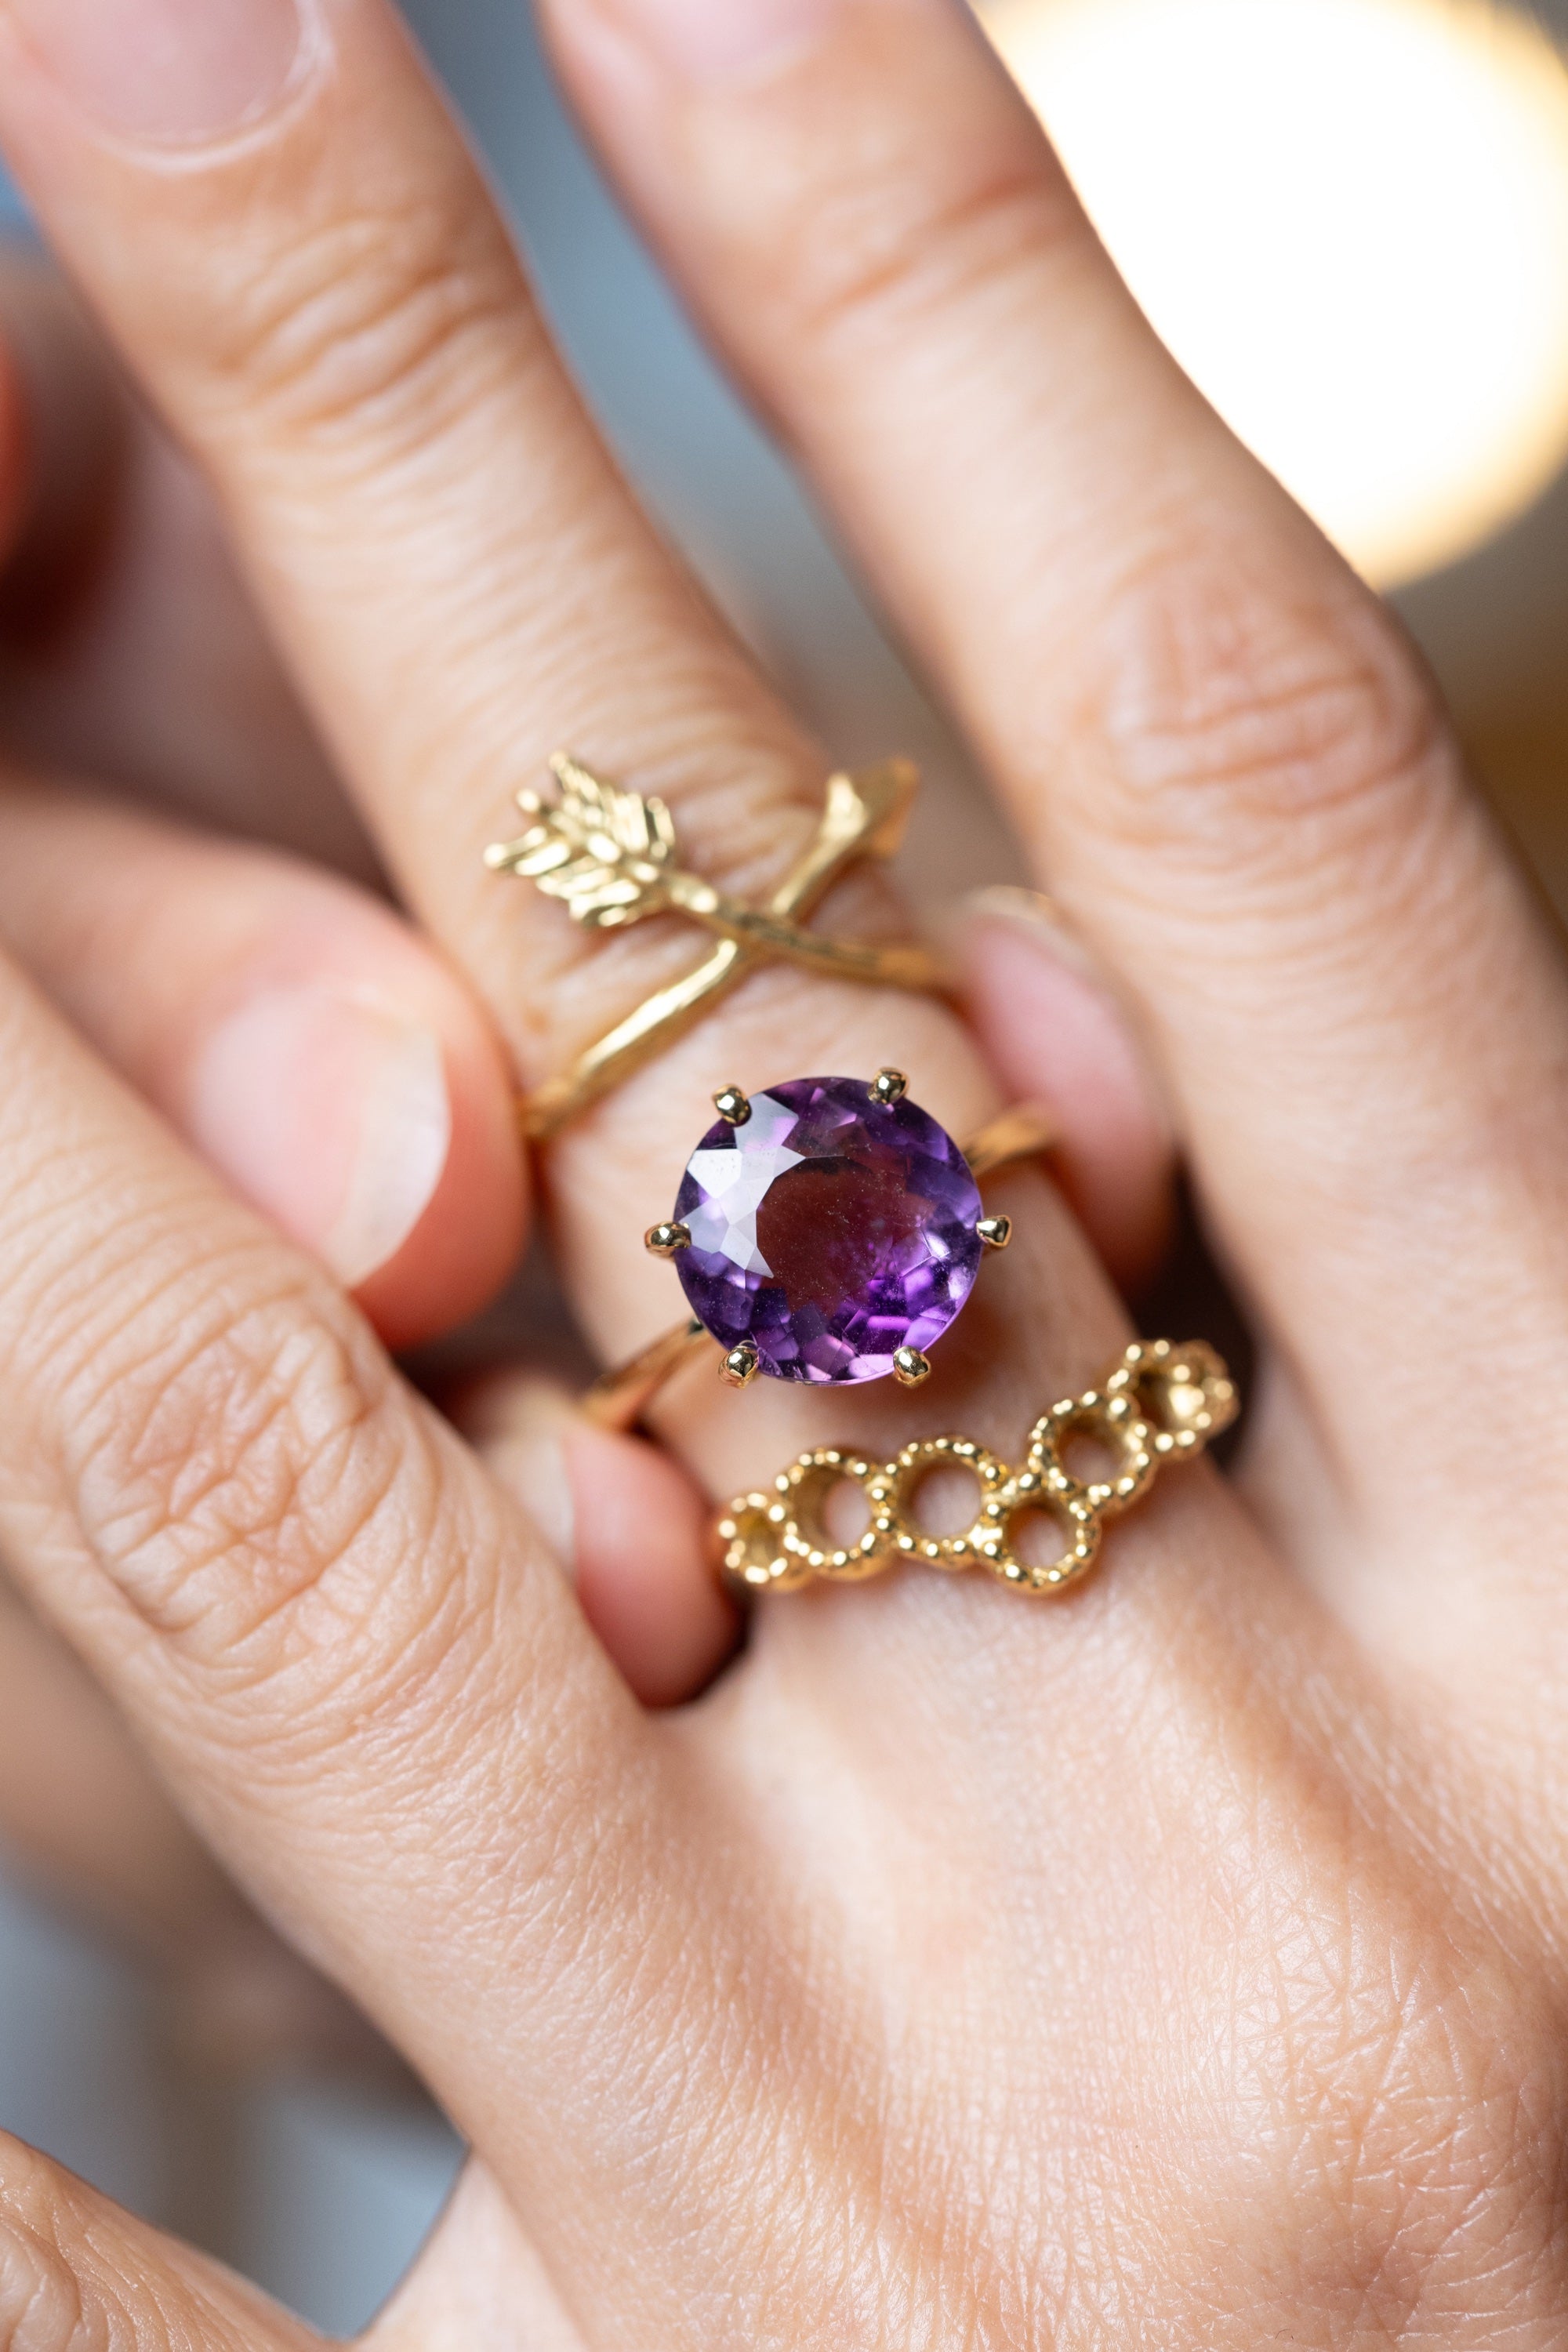 Large Amethyst Ring with 6 Prongs